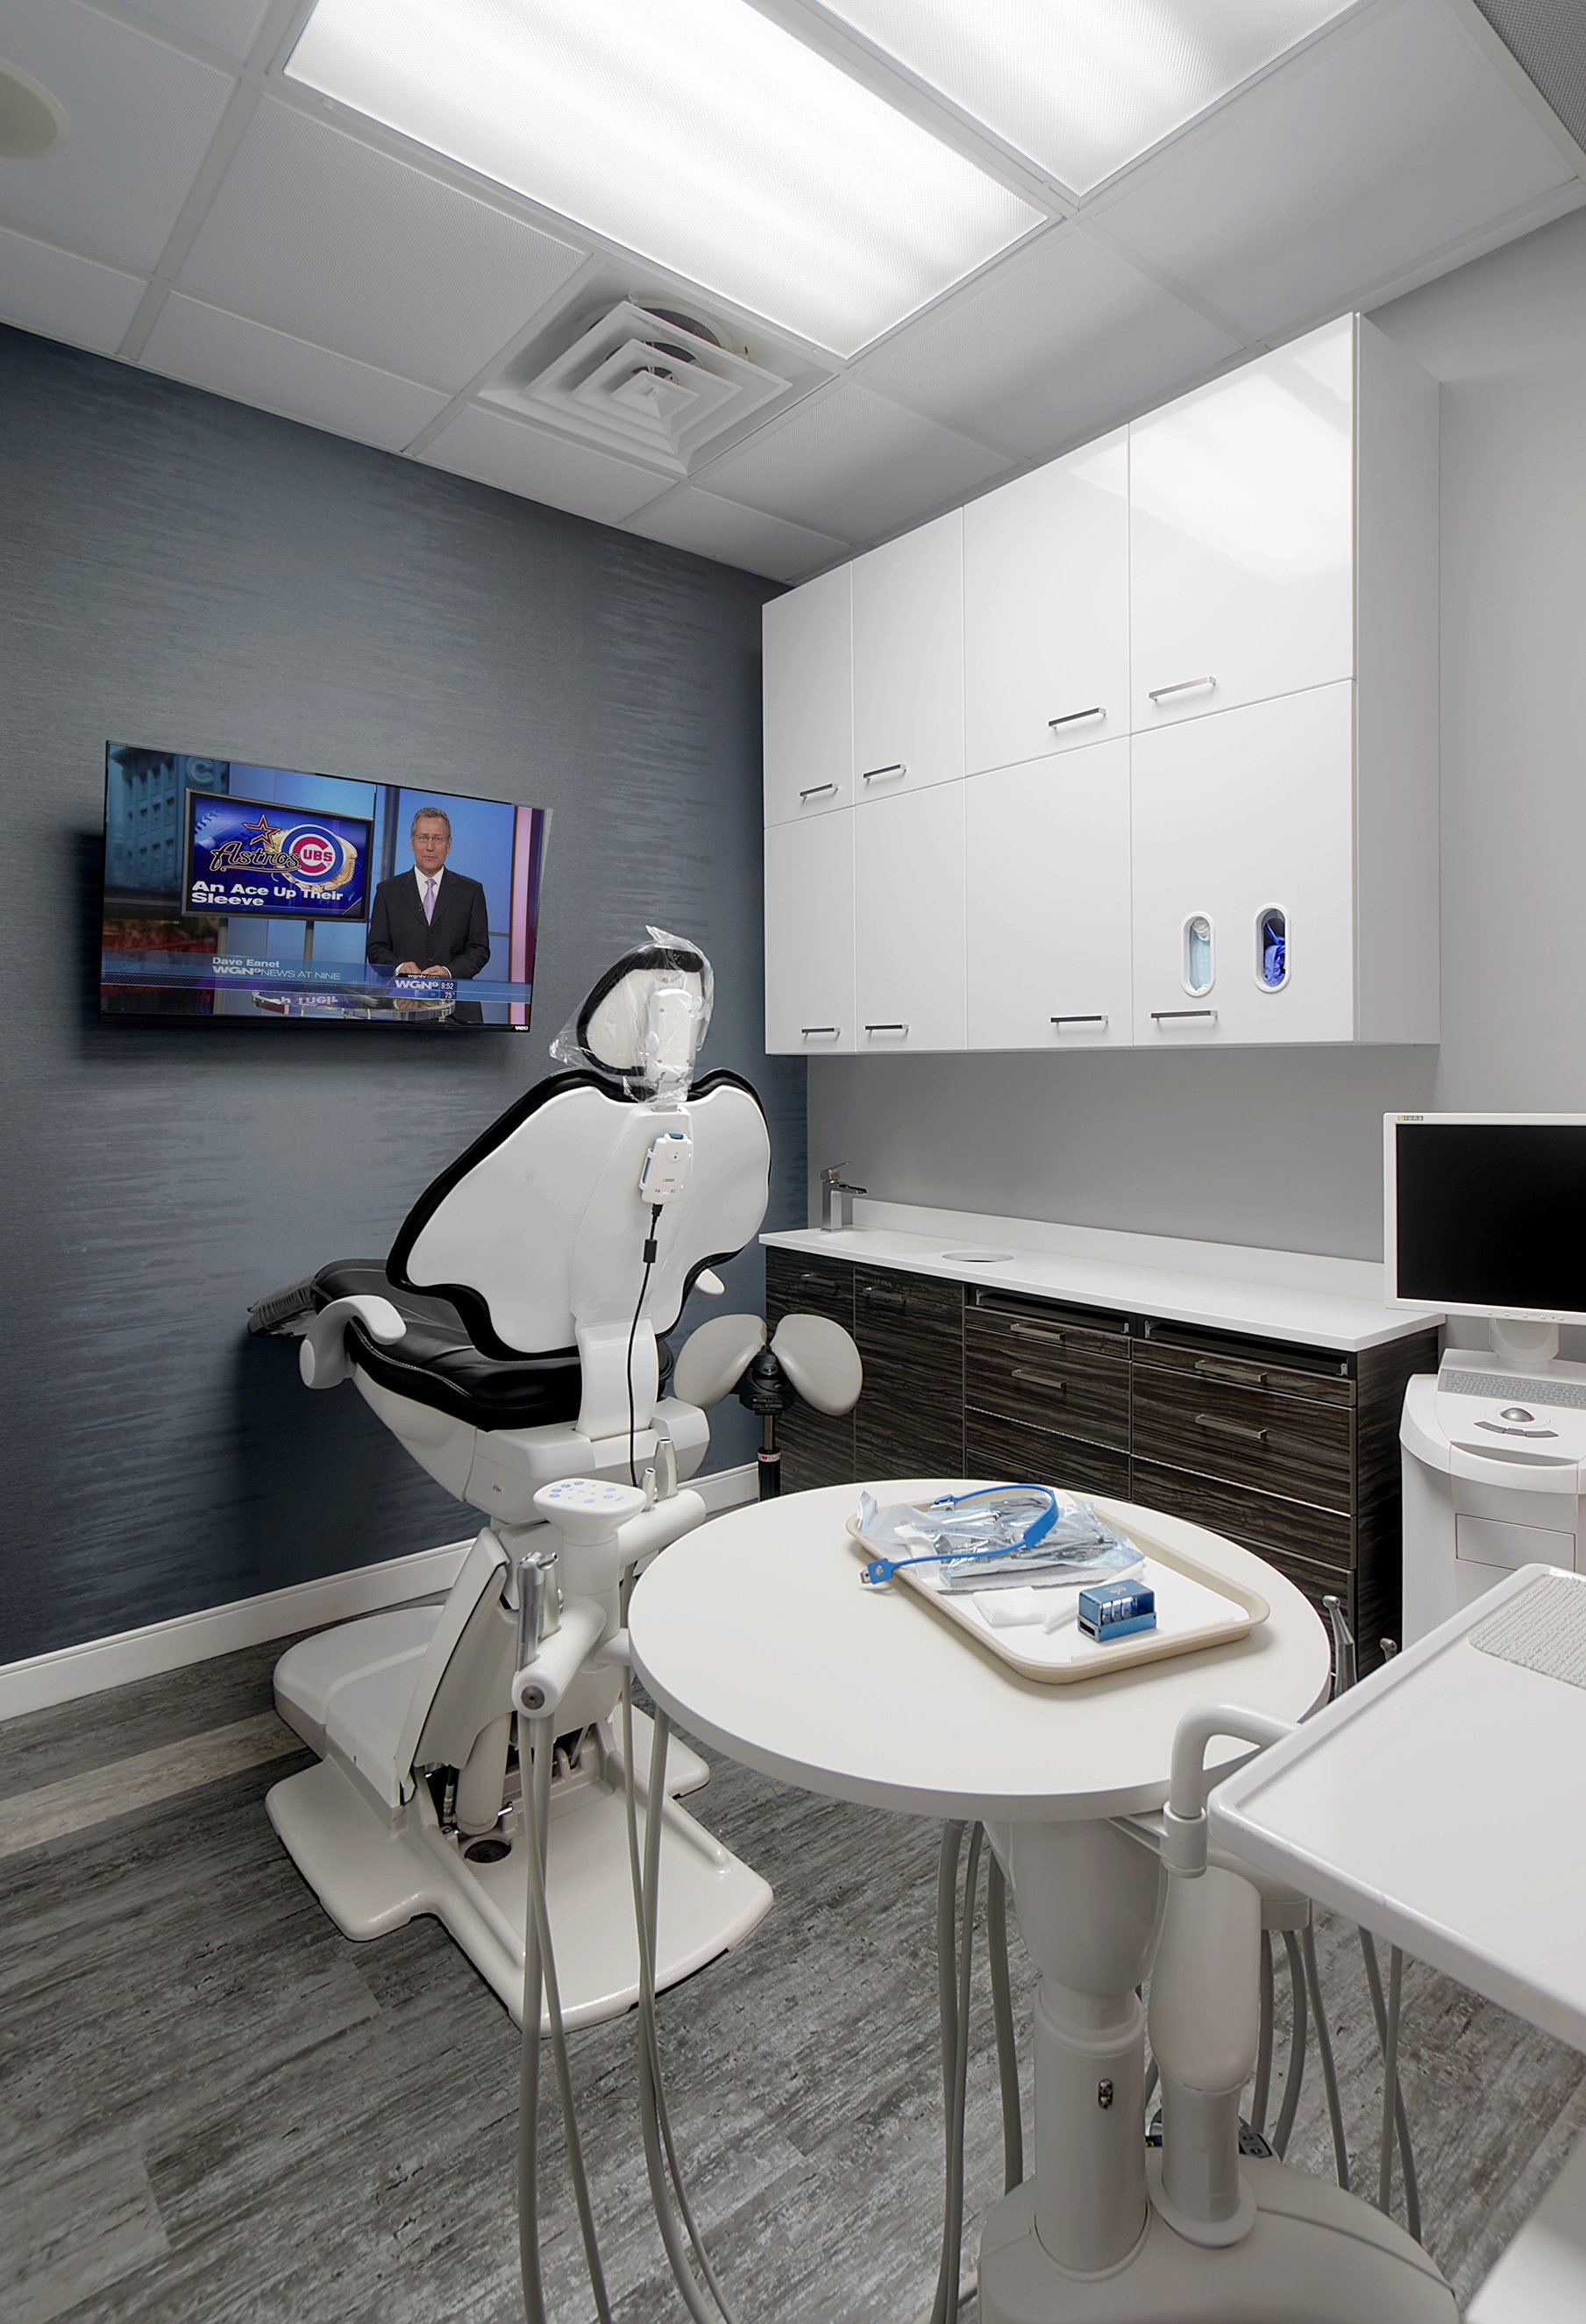 Dental Office Renovation Ideas in Pictures - Key Interiors